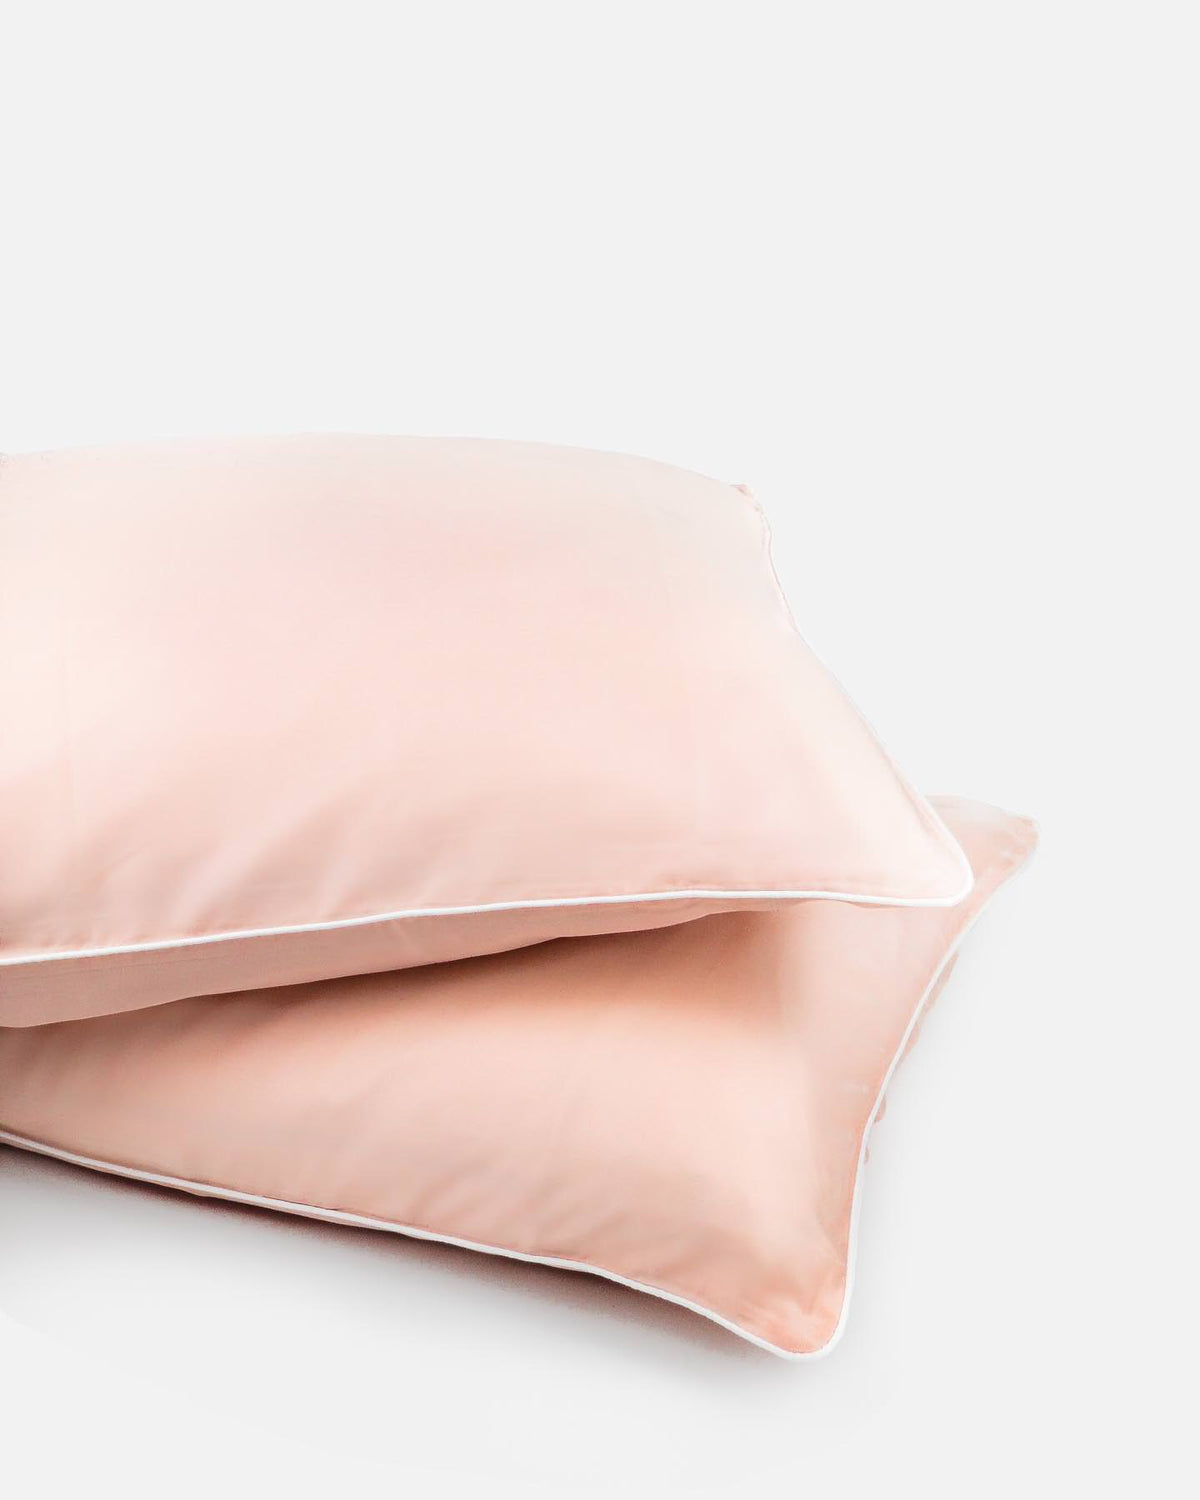 ava and ava ph organic bamboo lyocell pillowcases sand pink with white piping. vegan silk, soft, cool, smooth, breathable.